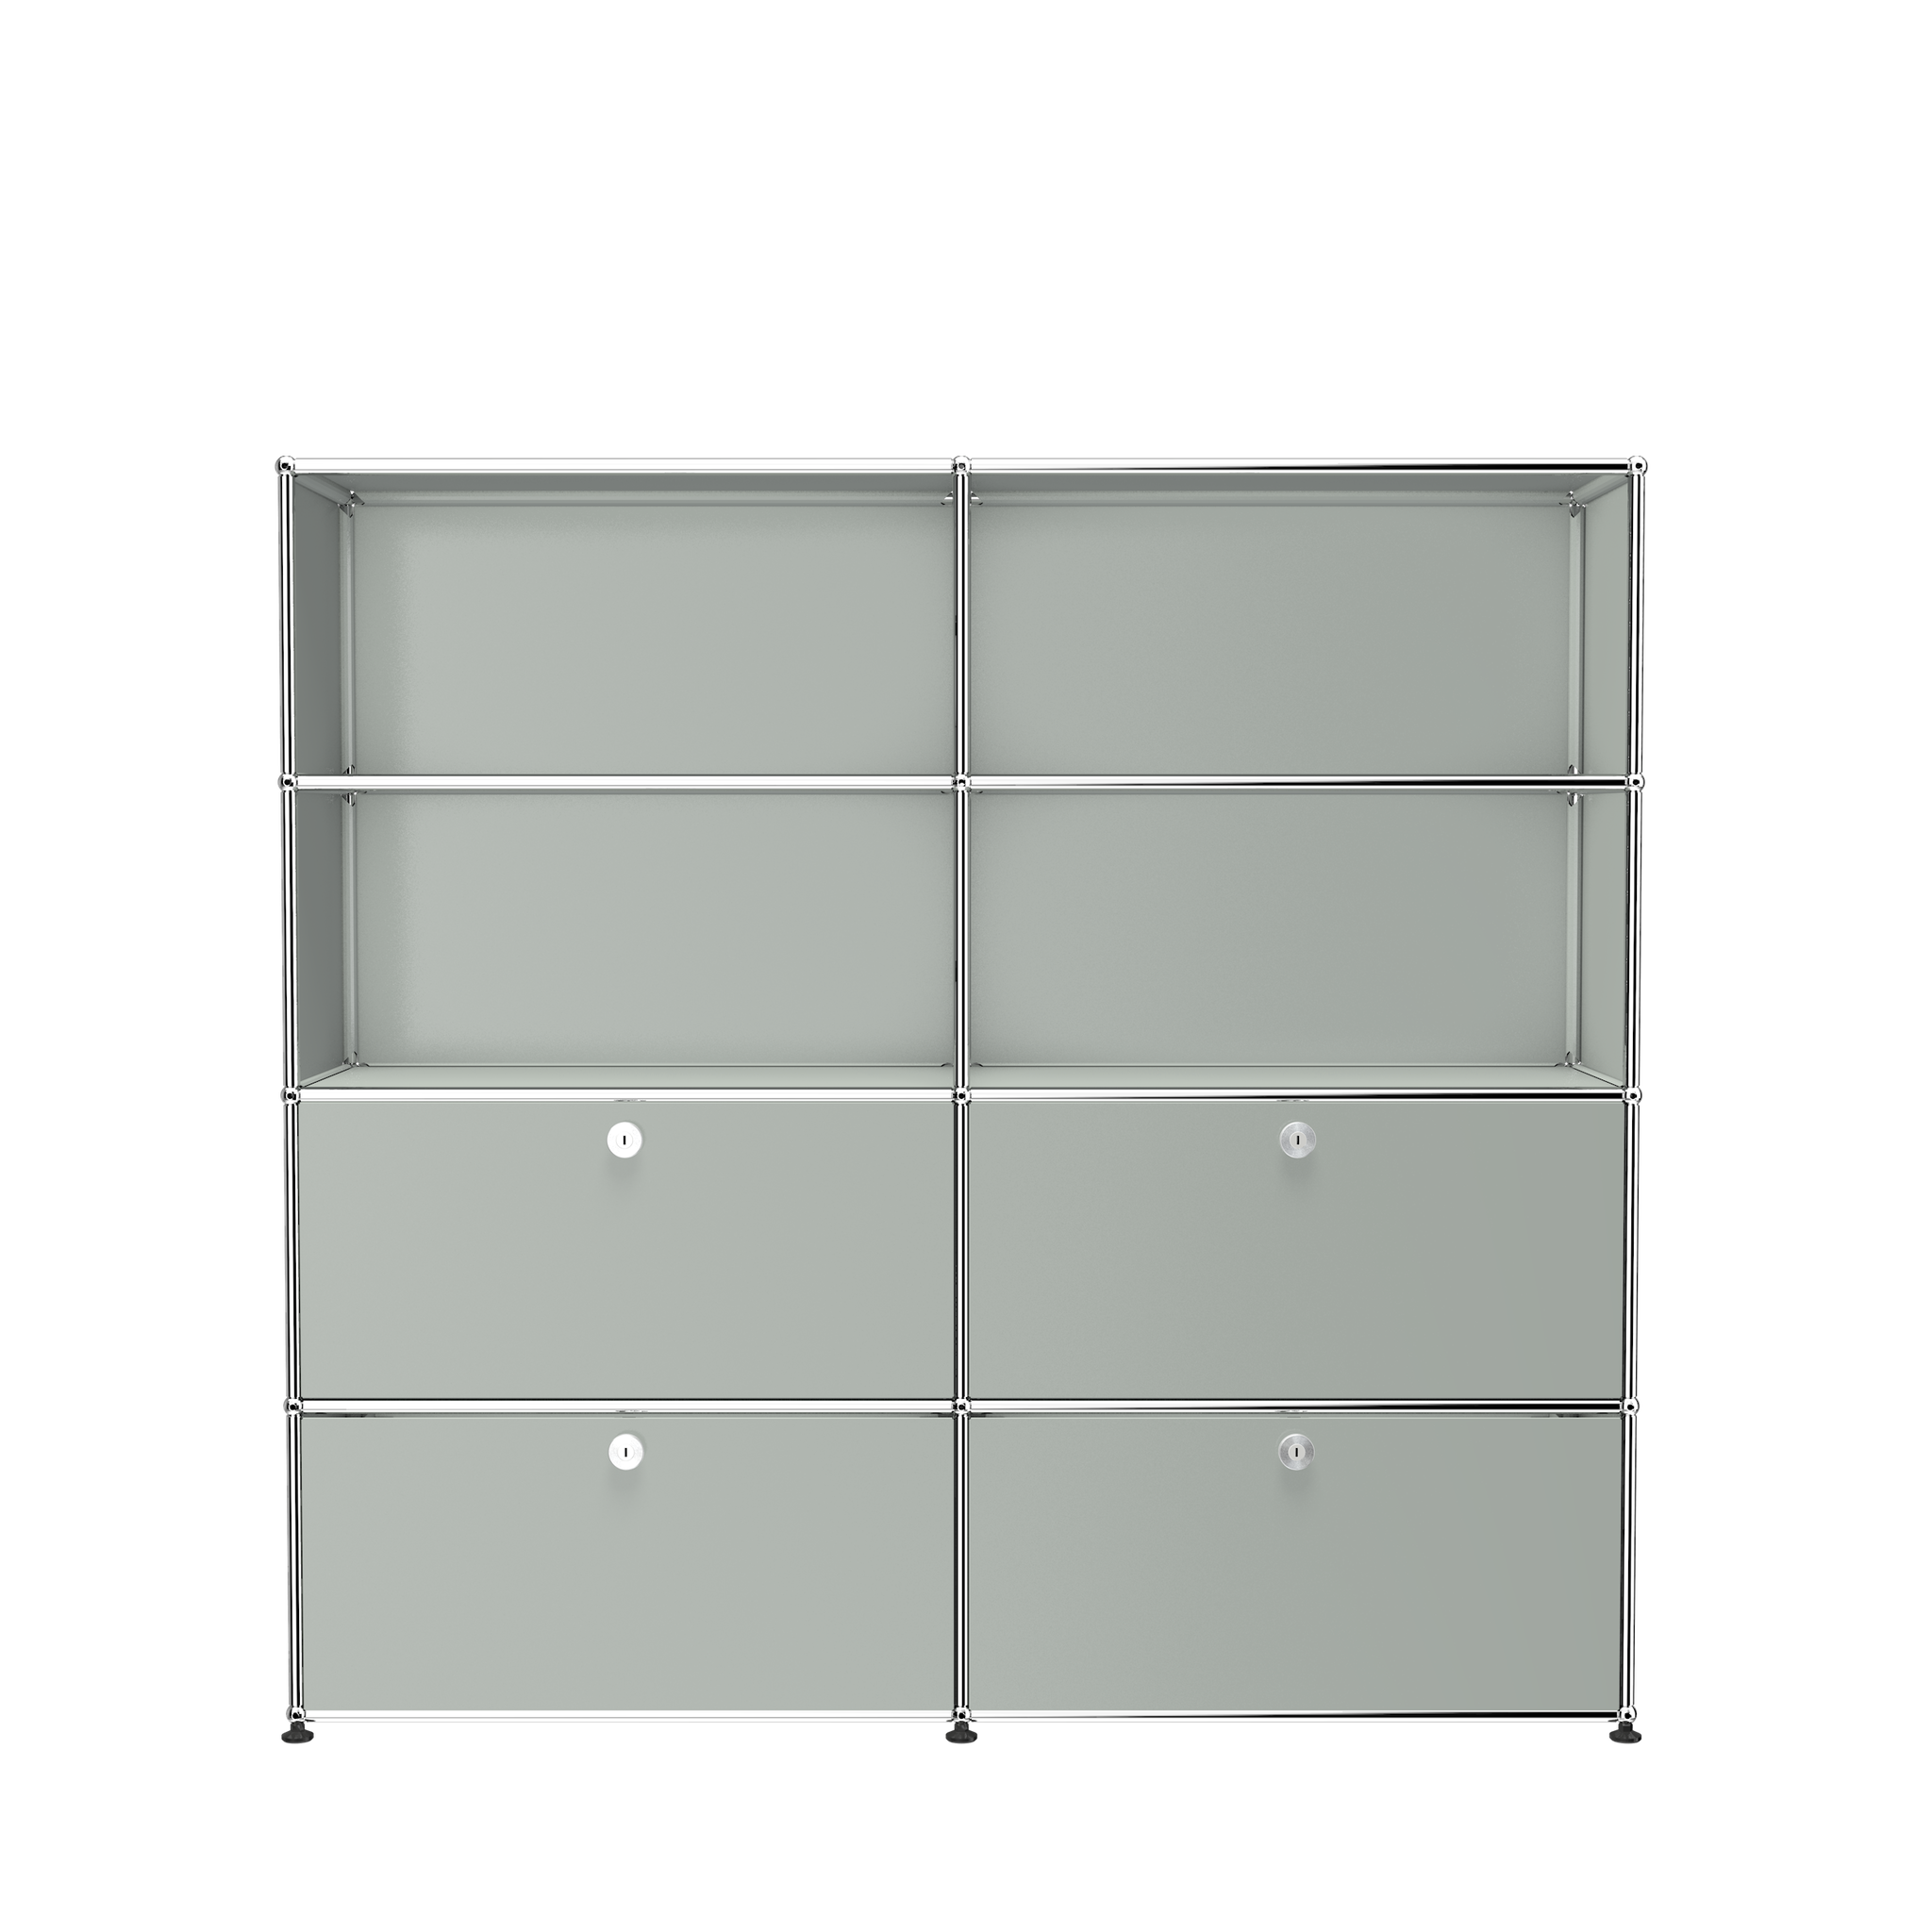 USM Haller Storage & Shelving Unit With Drawers (S2) in Light Gray